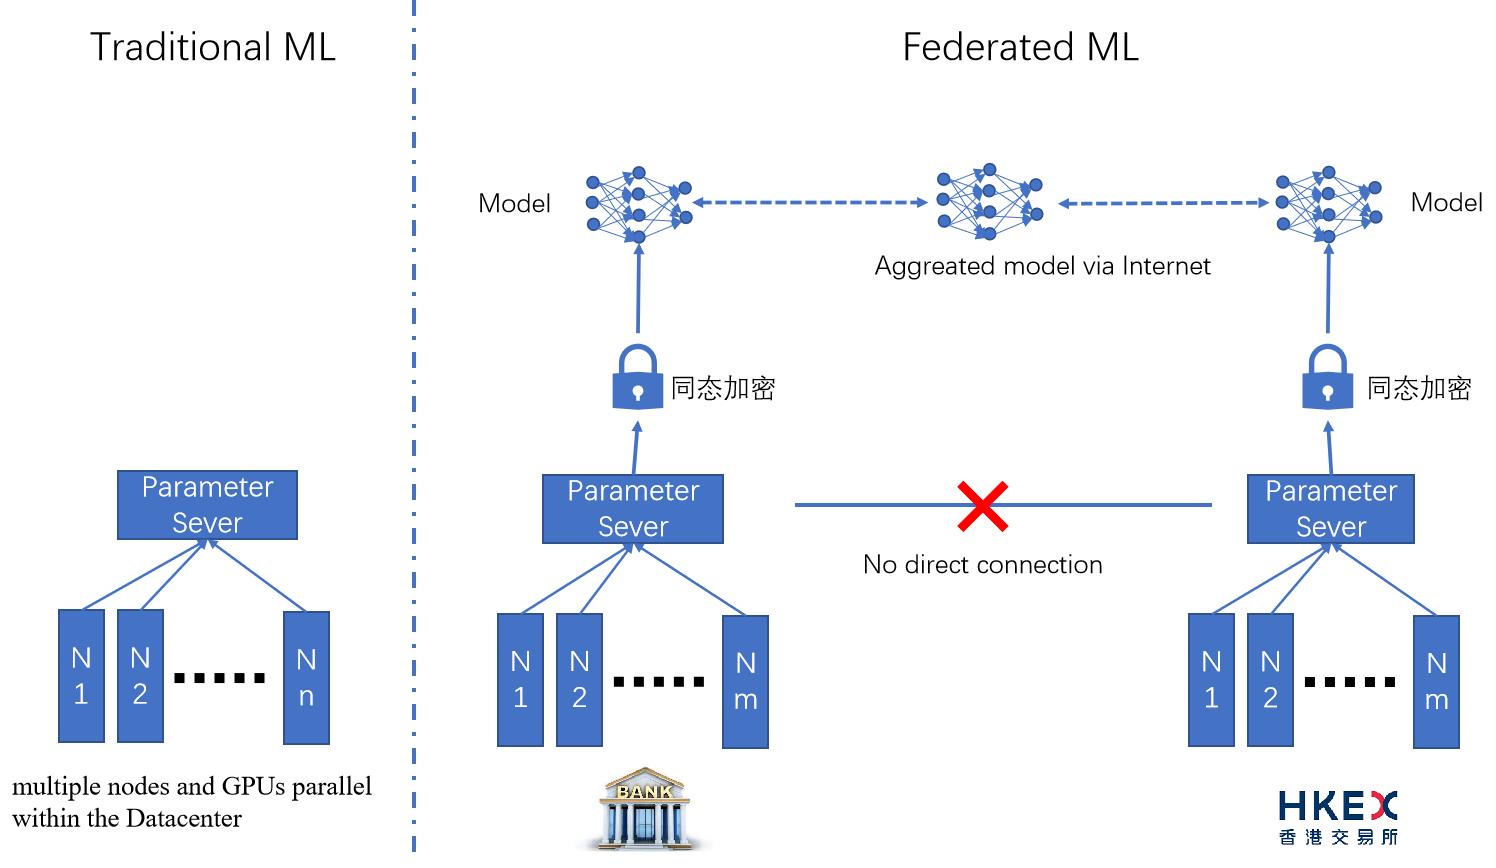 One FTL example between a bank and the HK stock market. When training a model, the bank and stock market first calculate and encrypt their intermedia results, which are collected and decrypted by a third party. Finally, the bank and stock market receive the aggregated results and update their own model.